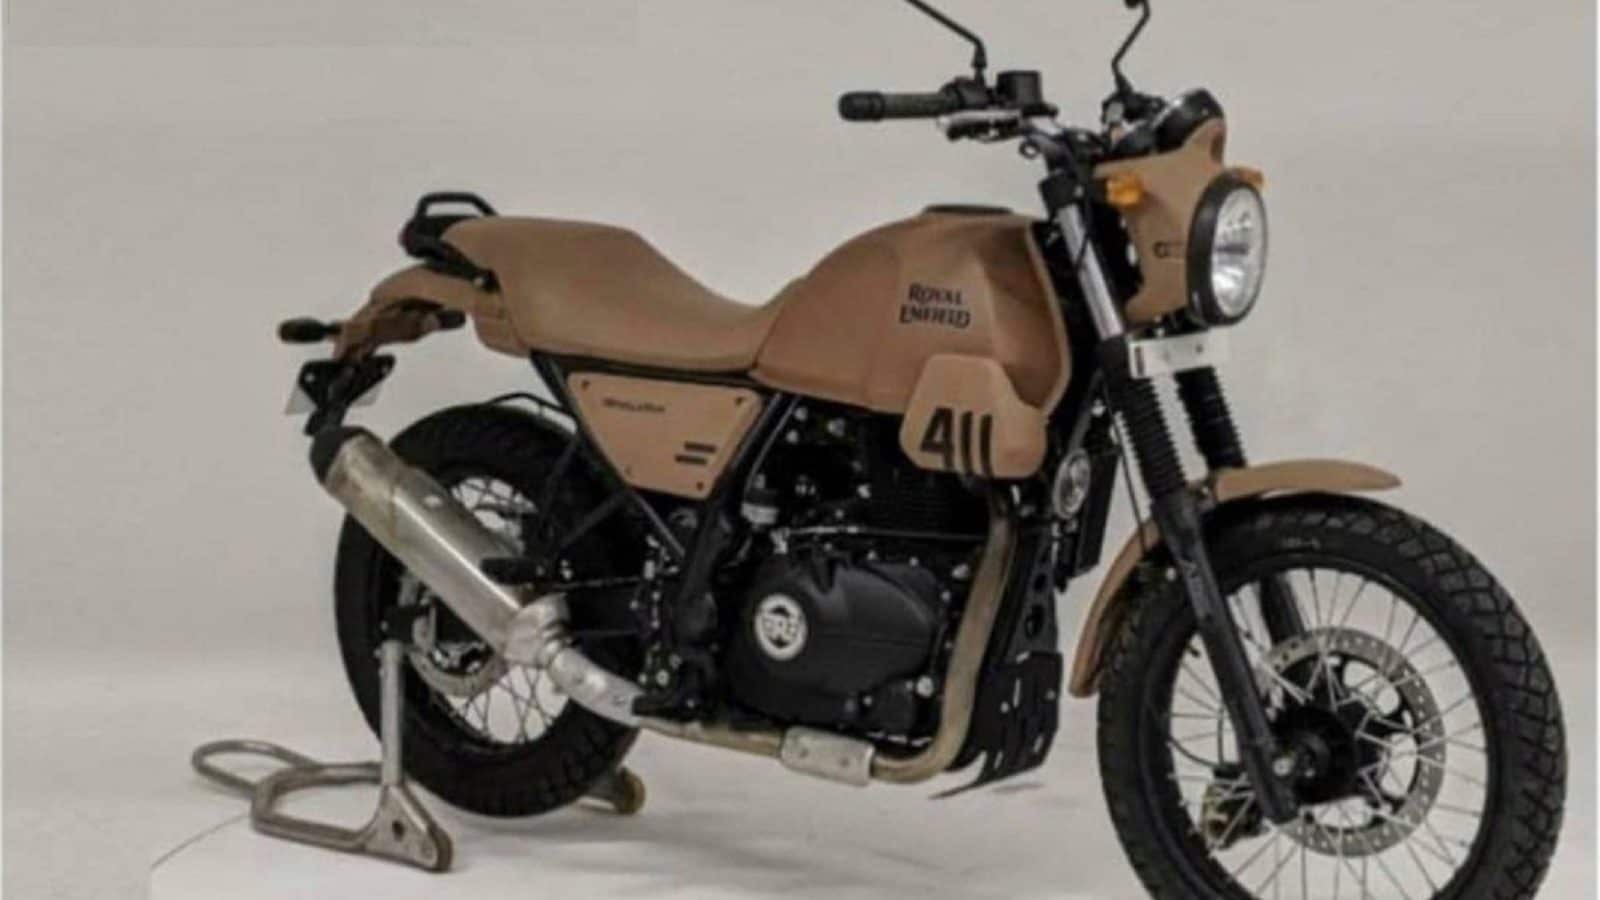 Royal Enfield Scram 411: All You Need to Know About Himalayan Based